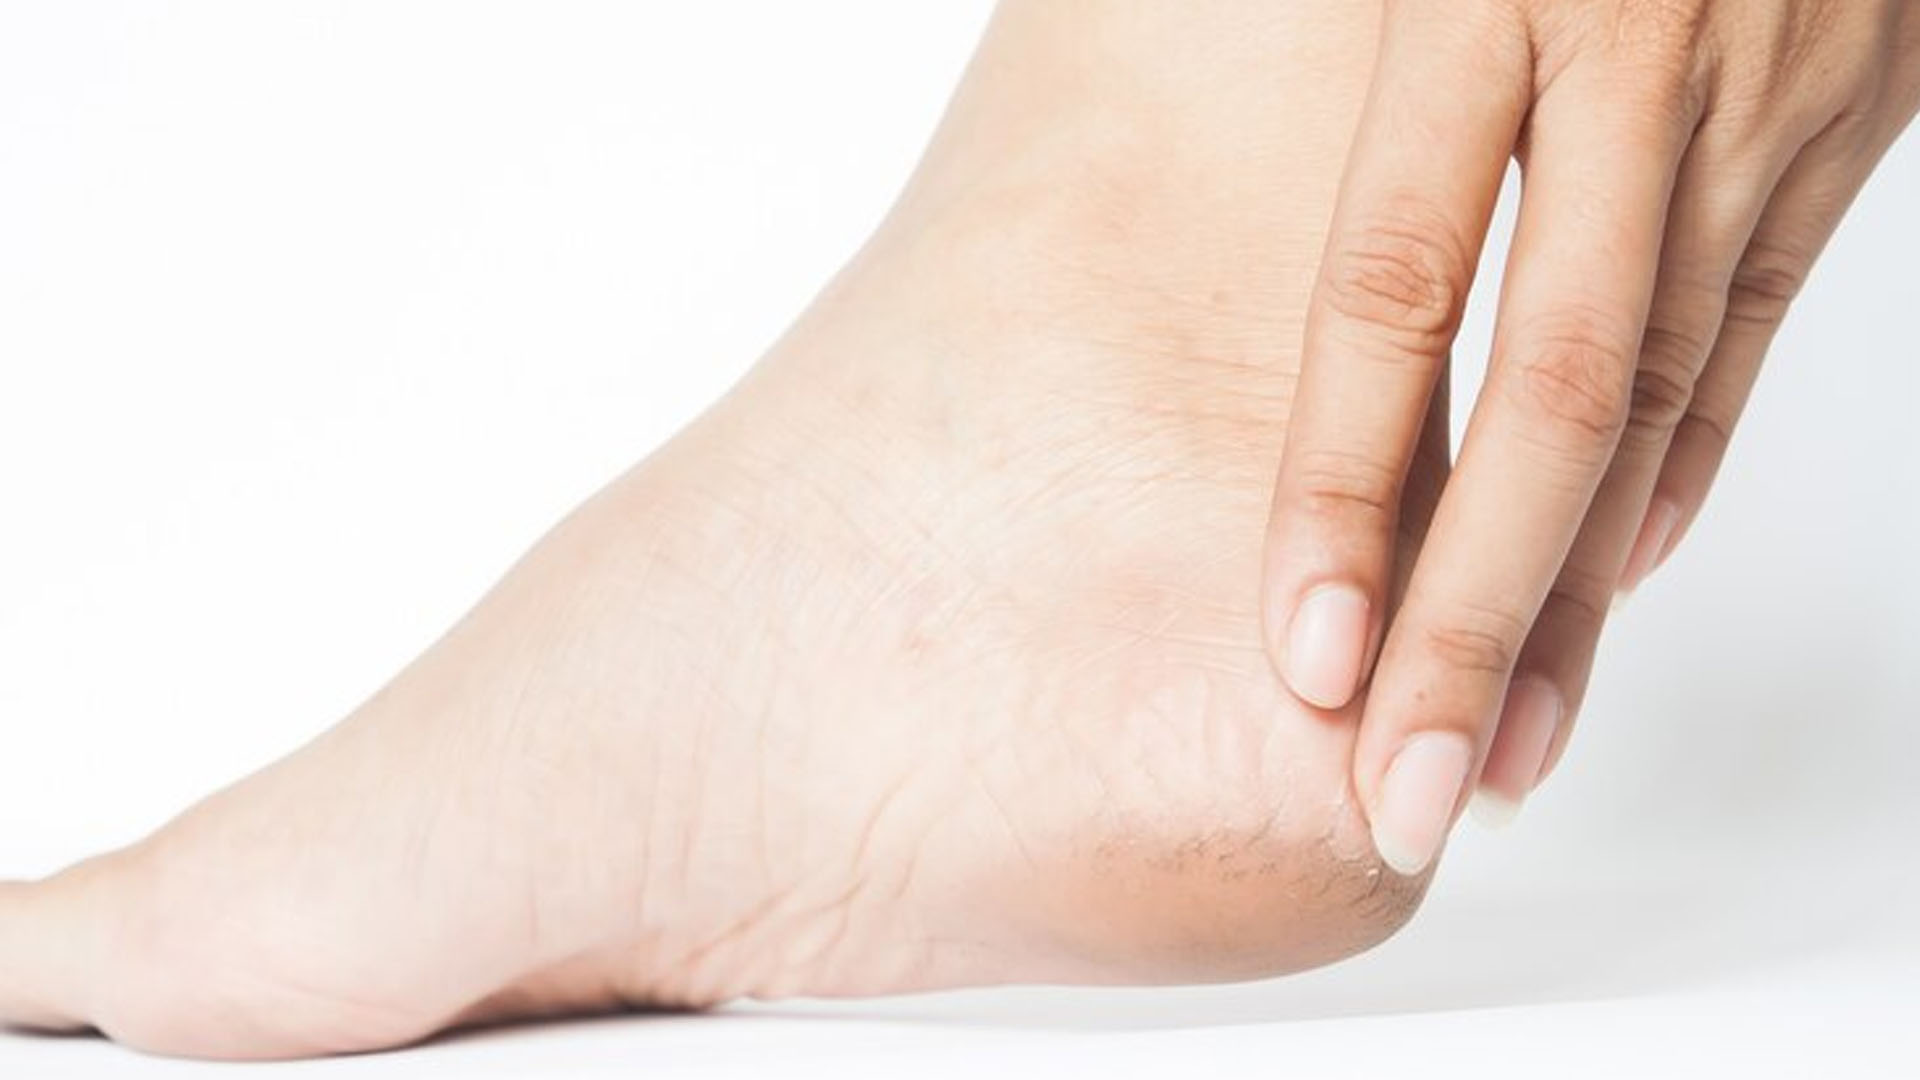 What are the Home Remedies for Cracked Heel?